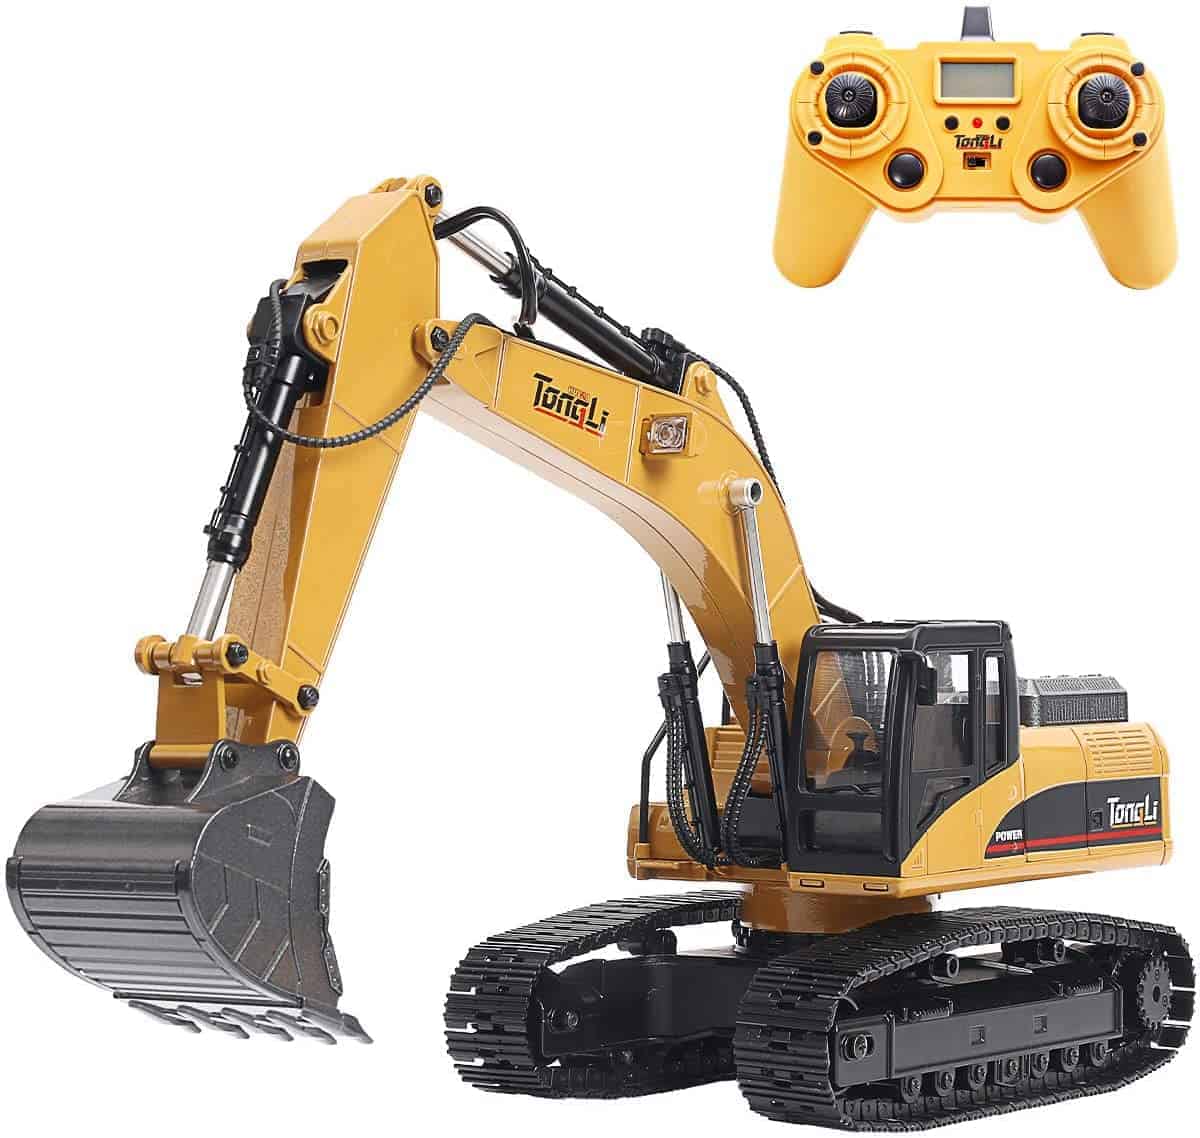 TongLi 1580 1 14 Scale All Metal RC Excavator Toy for Adults